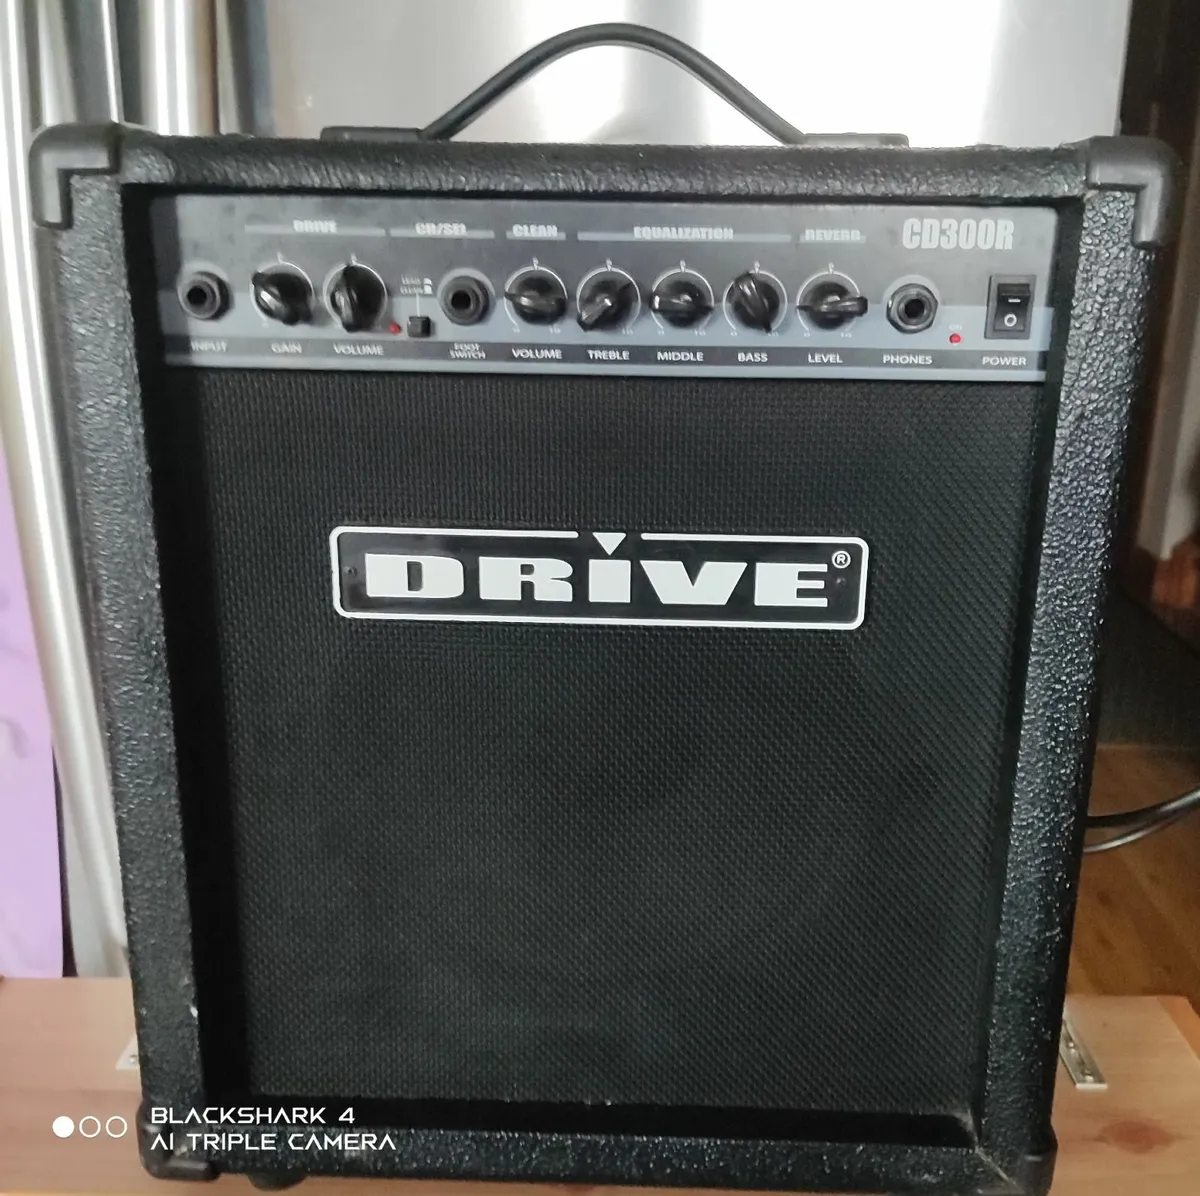 Drive CD-300R Guitar Combo Amplifier with Reverb. - Image 1